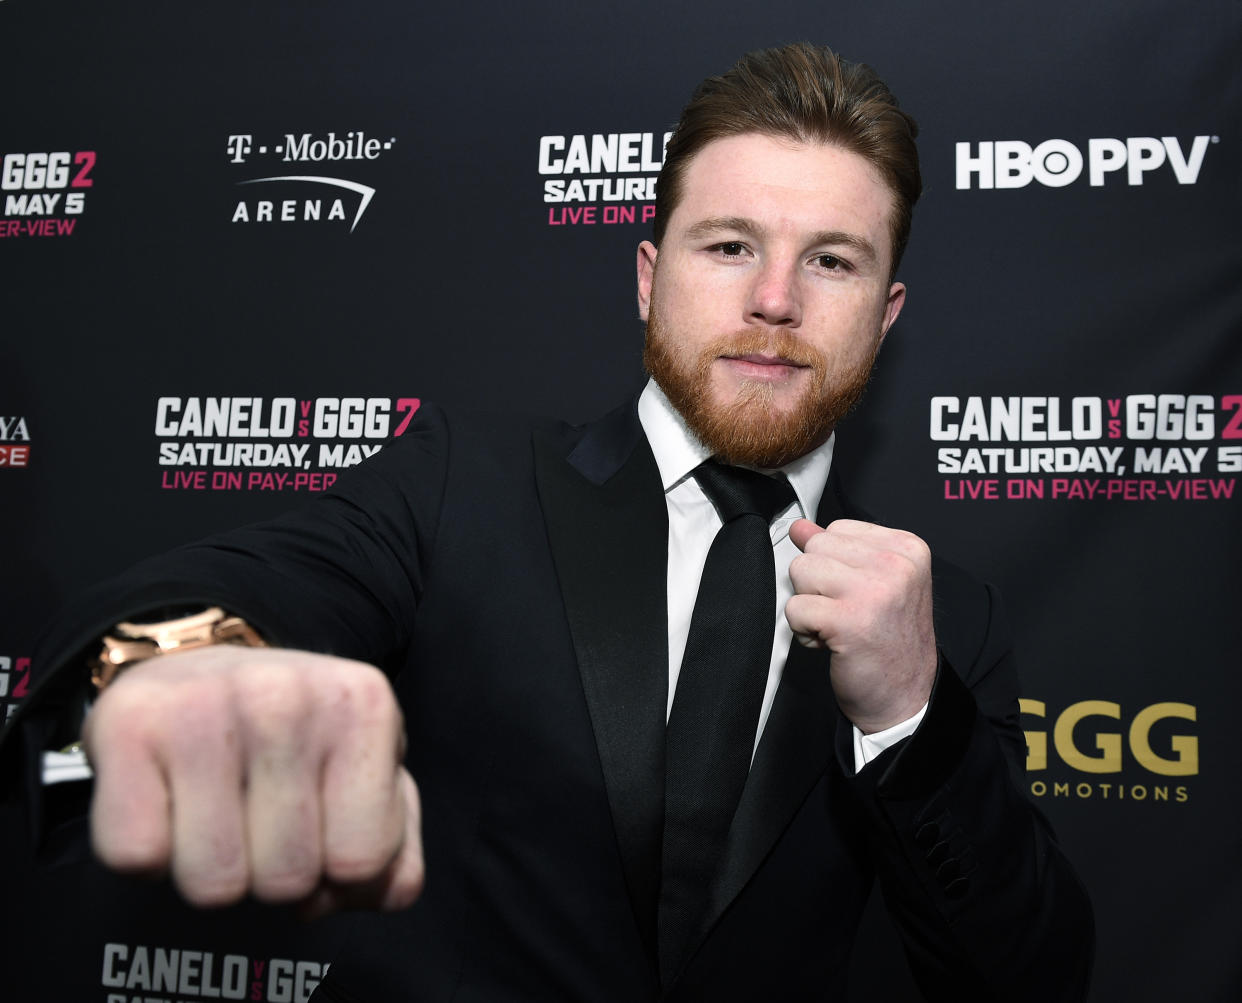 Boxer Canelo Alvarez was temporarily suspended Friday for two separate drug test failures, putting his May 5 bout in Las Vegas with Gennady Golovkin in jeopardy. (Getty Images)